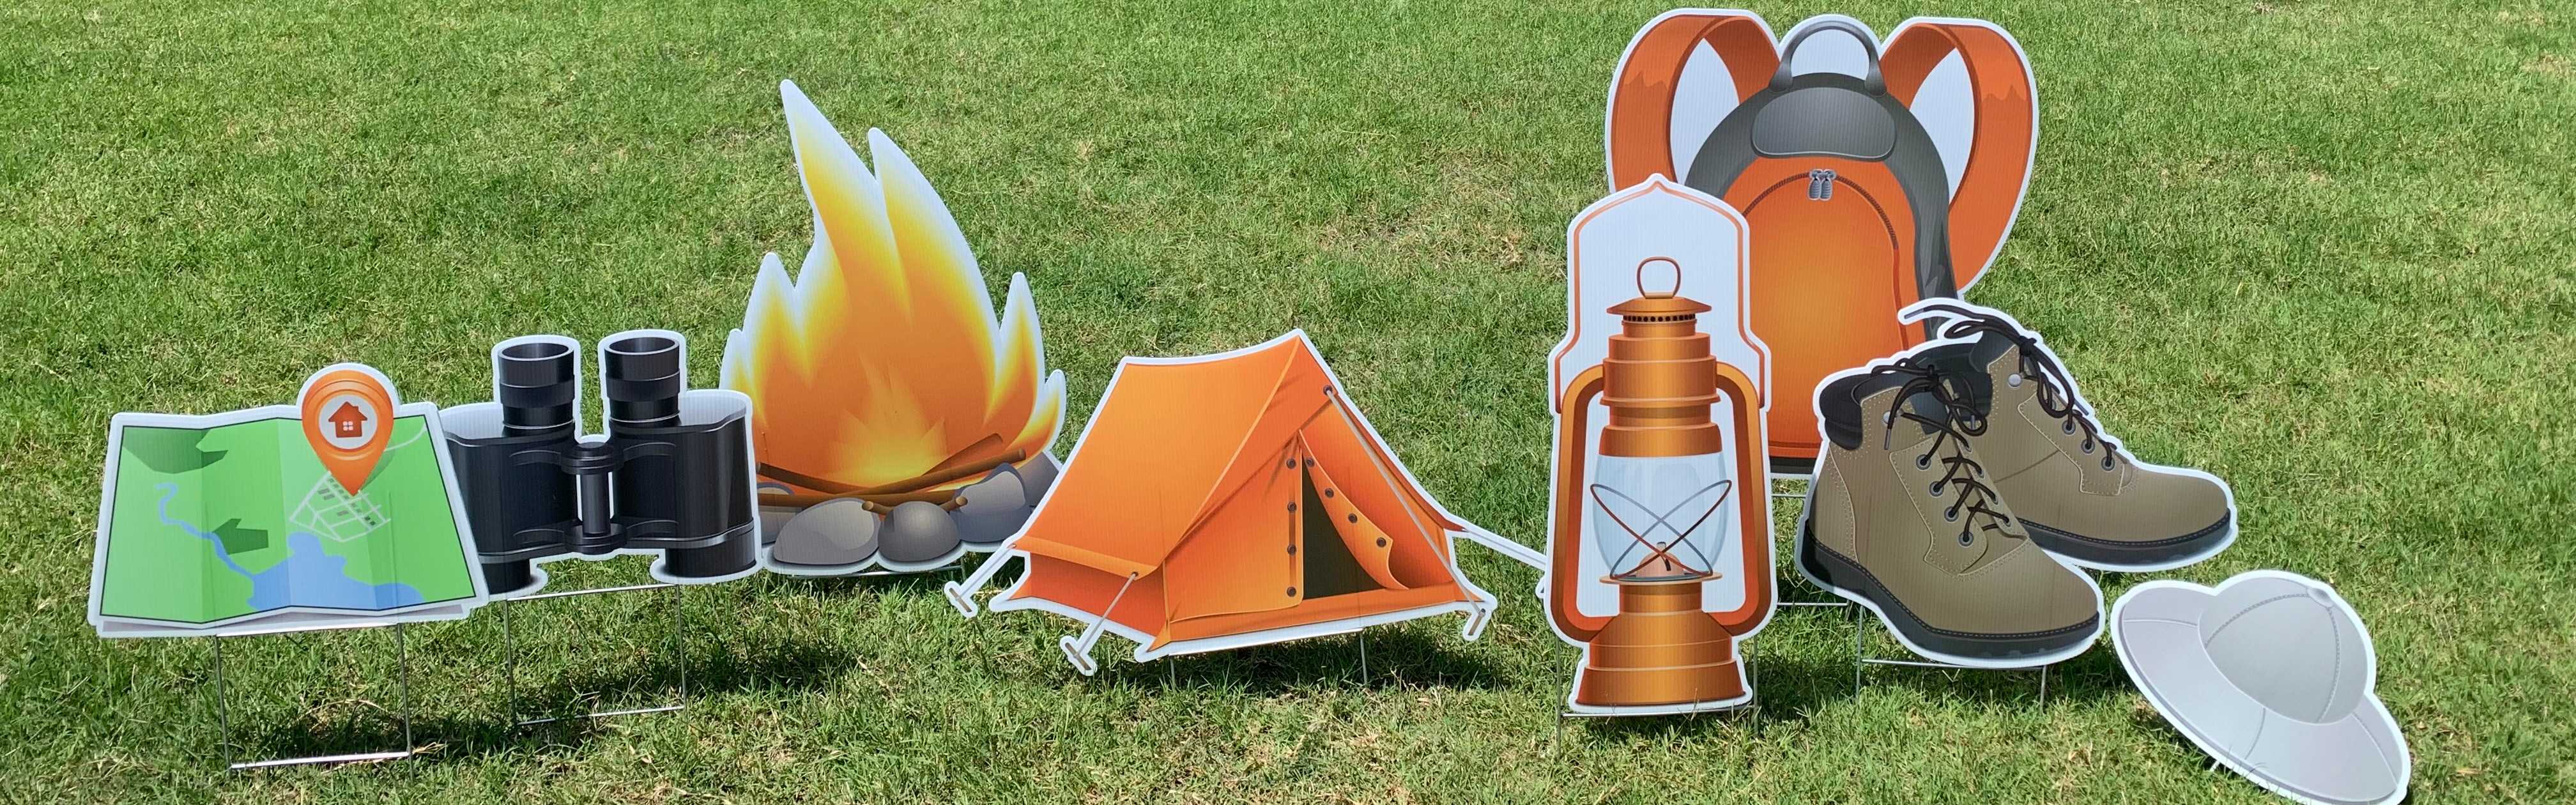 Yard card sign collection camping 